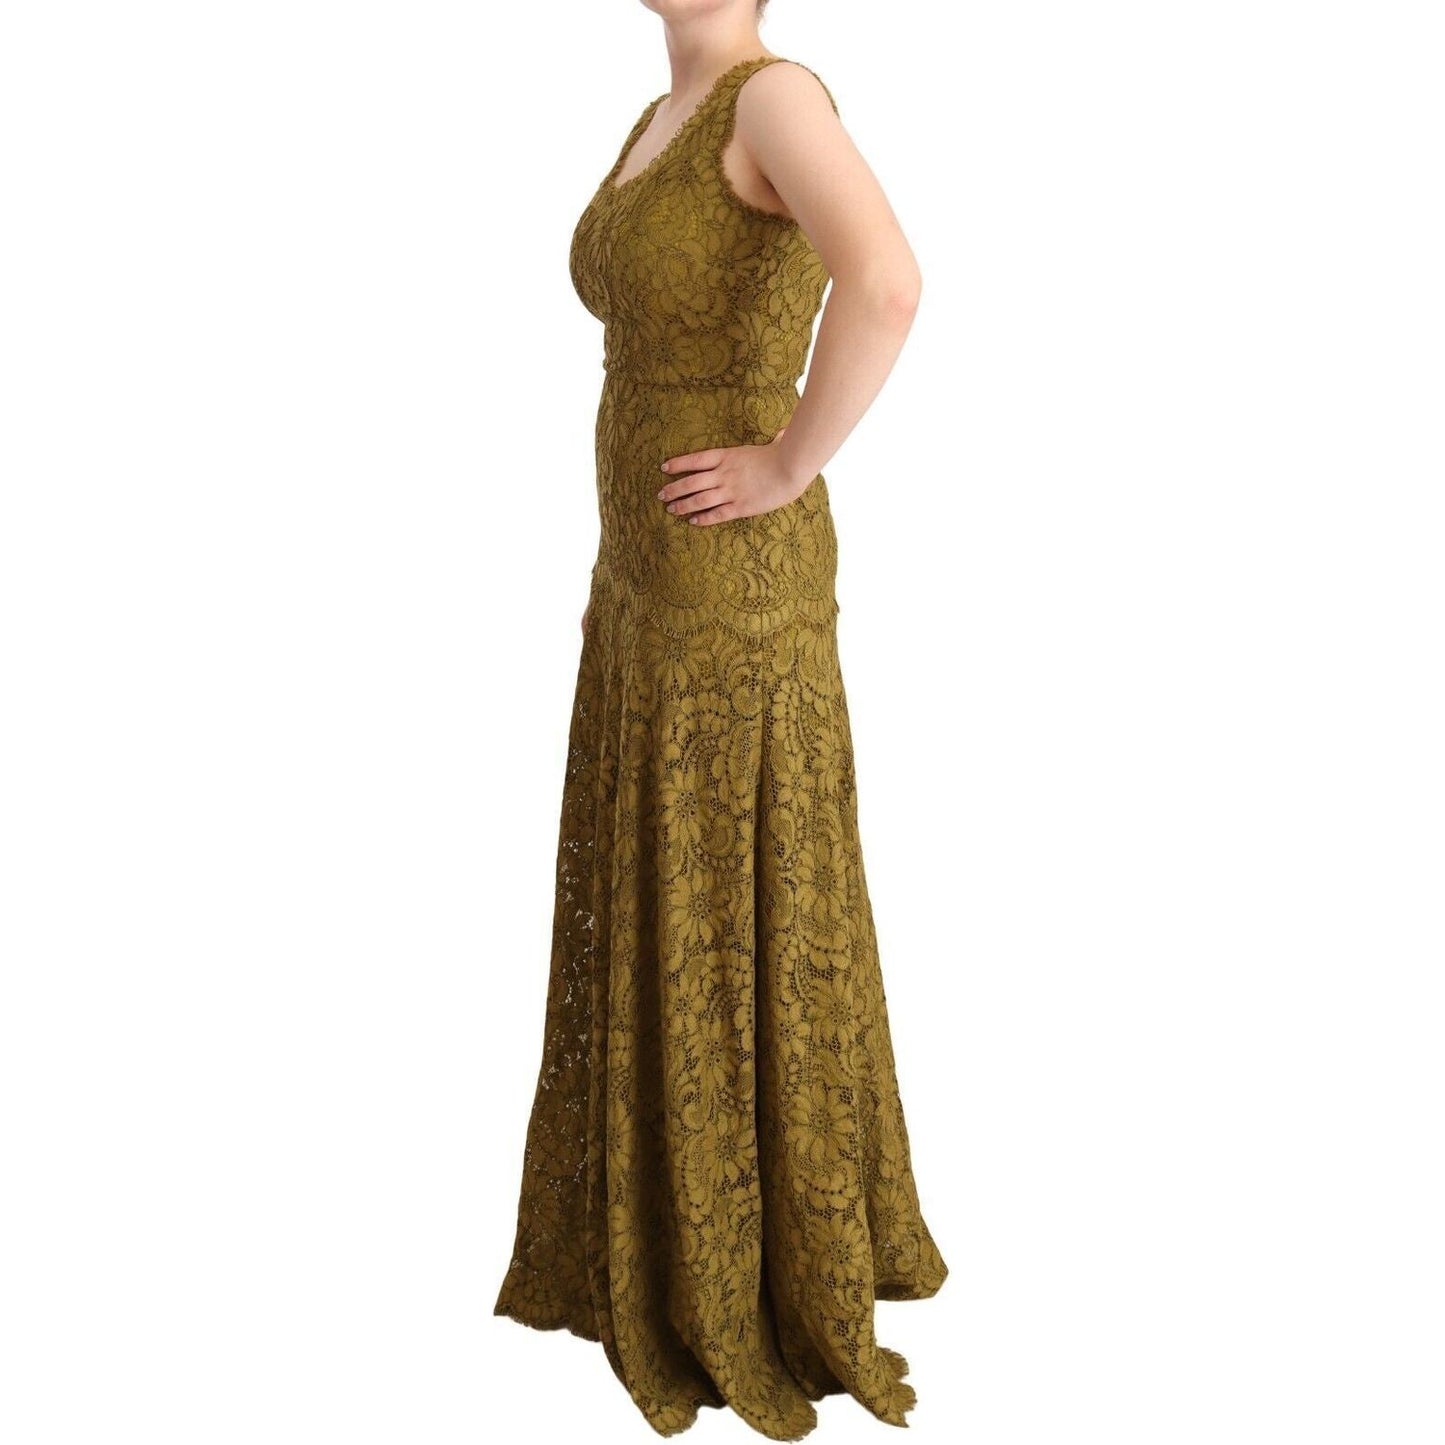 Dolce & Gabbana Elegant Lace Floor-Length Sleeveless Gown brown-floral-lace-maxi-floor-length-dress